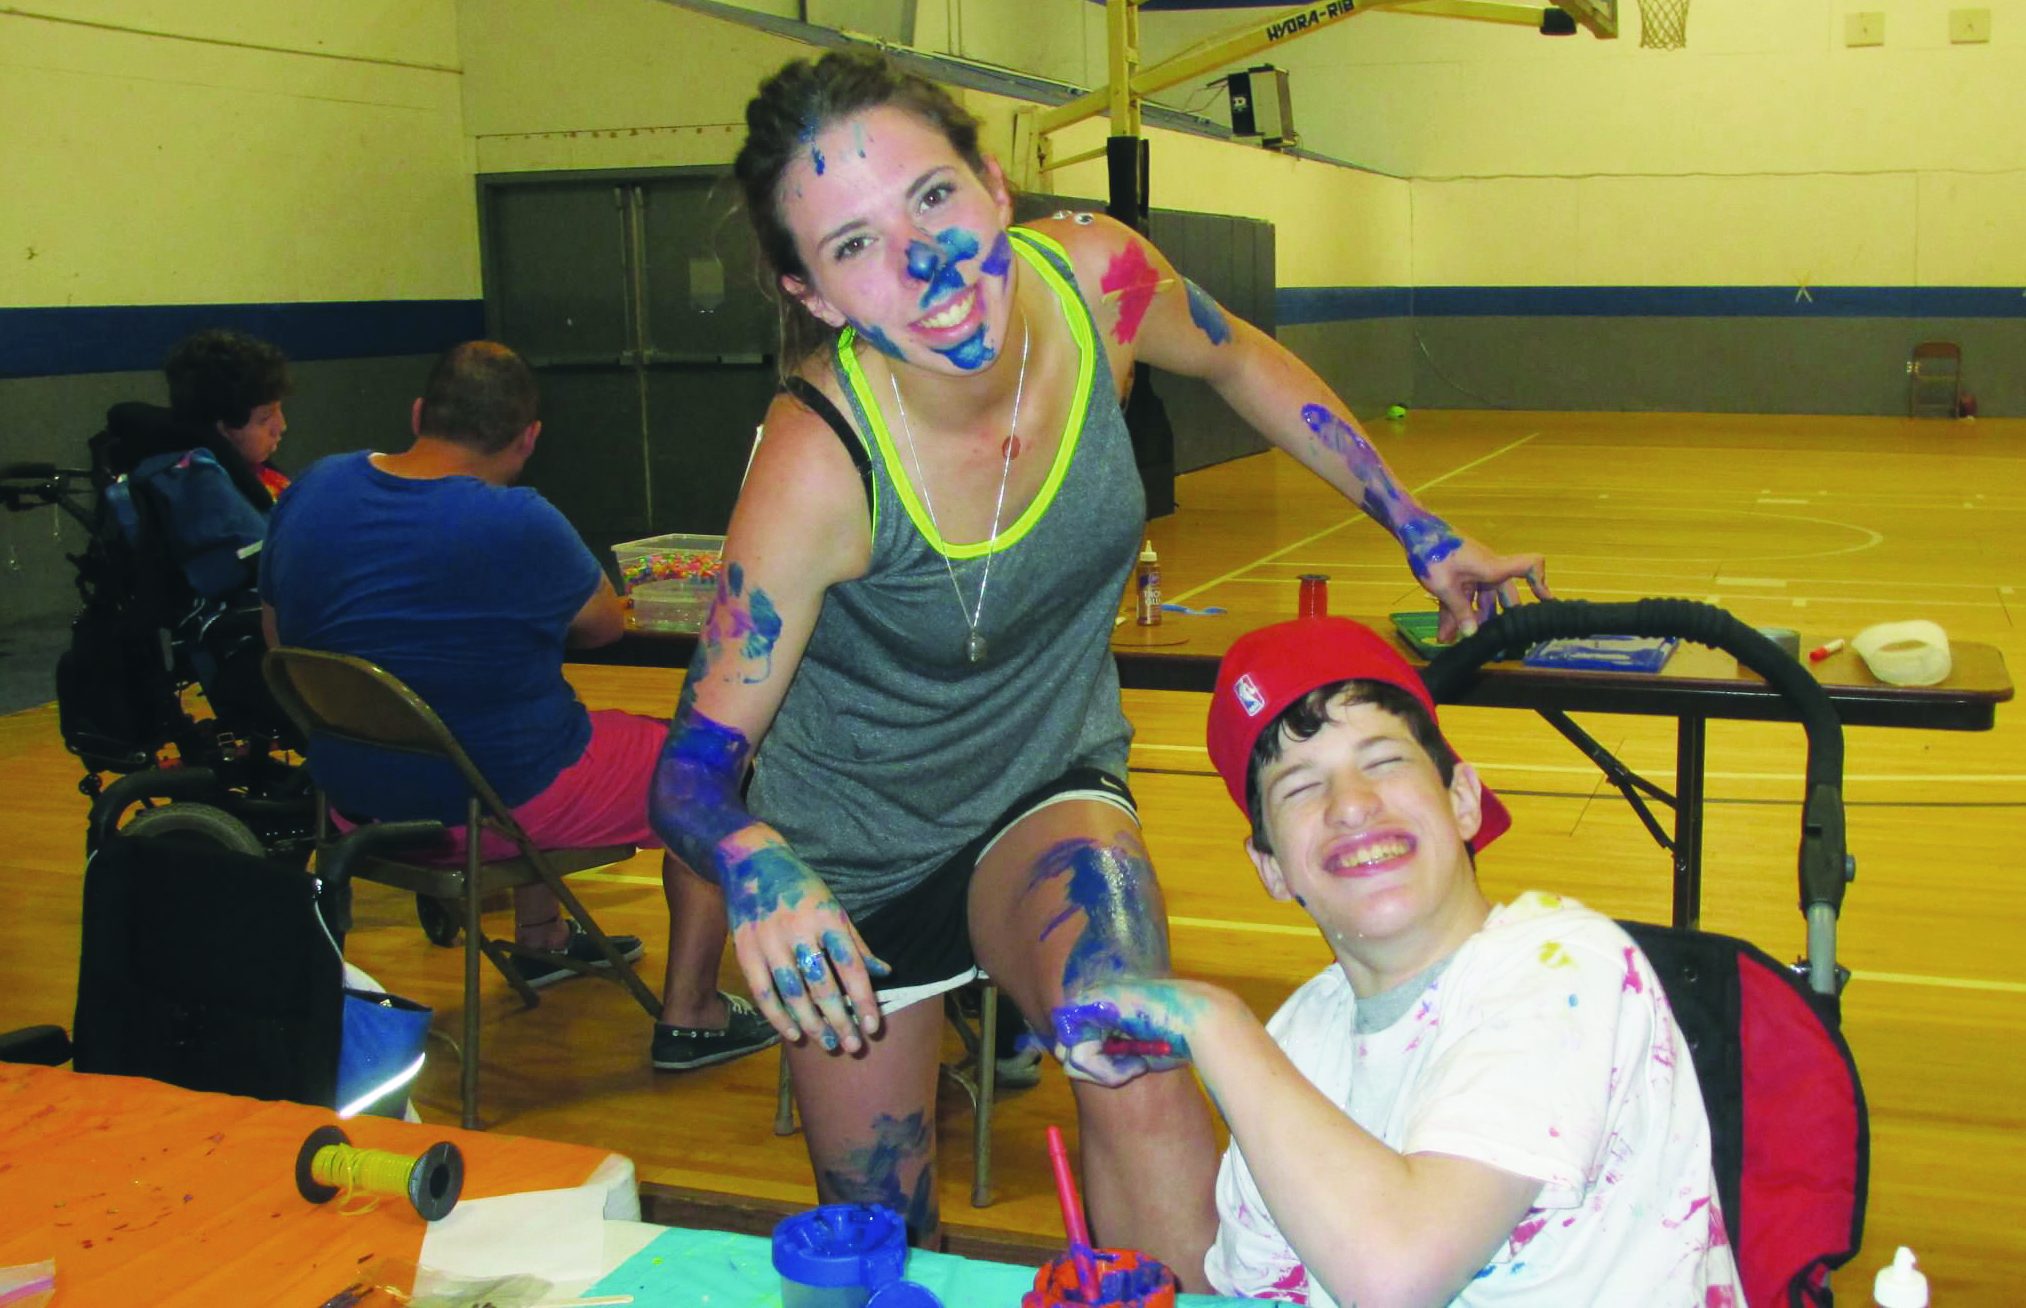 A happy camper wearing a red working with paint sits at a table while supervised by a counselor covered in paint from head to legs.